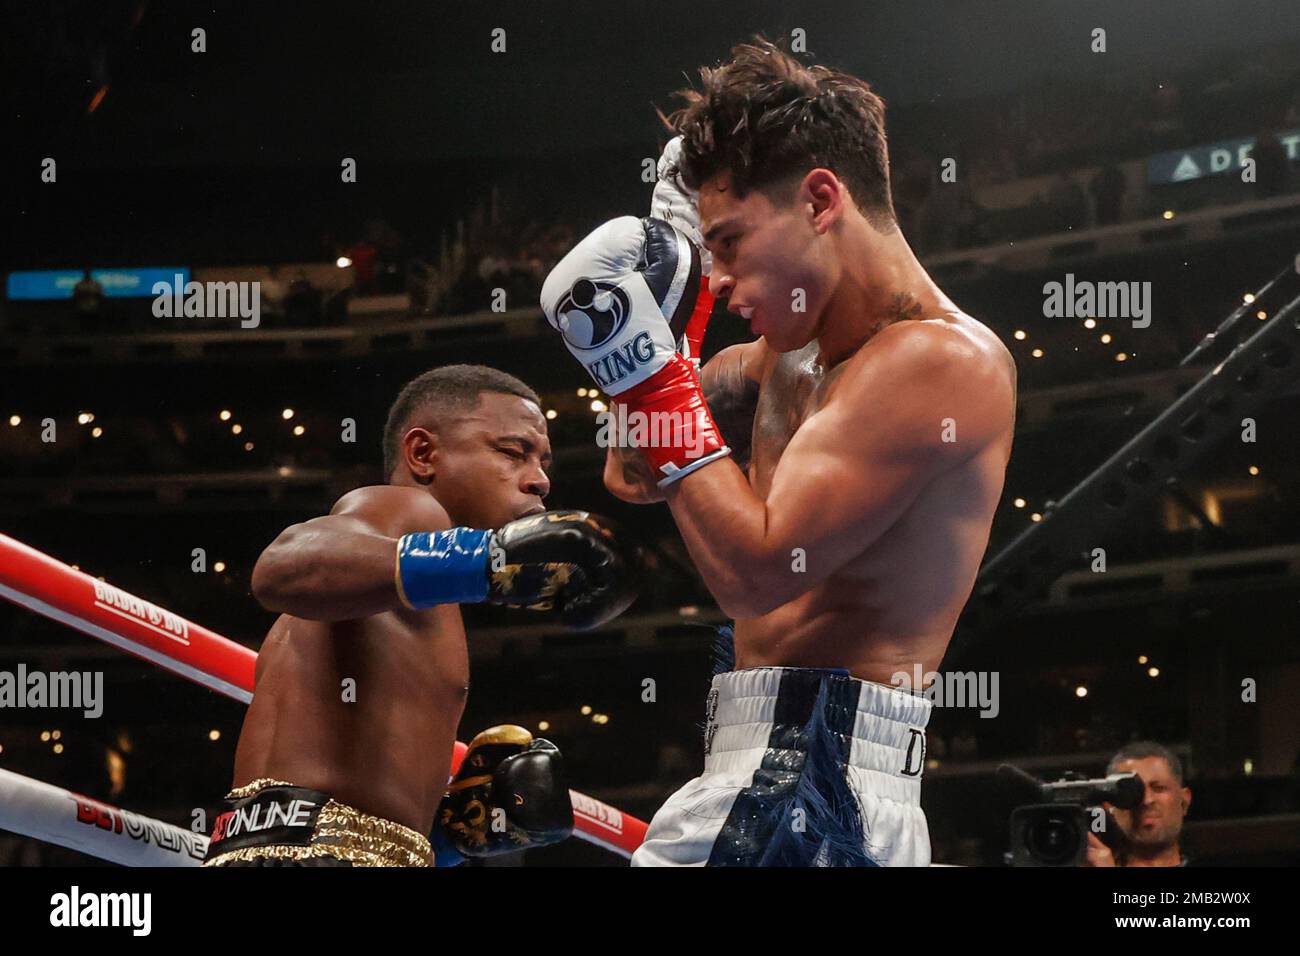 Ryan Garcia, right, and Javier Fortuna exchange punches during a lightweight boxing match Saturday, July 16, 2022, in Los Angeles